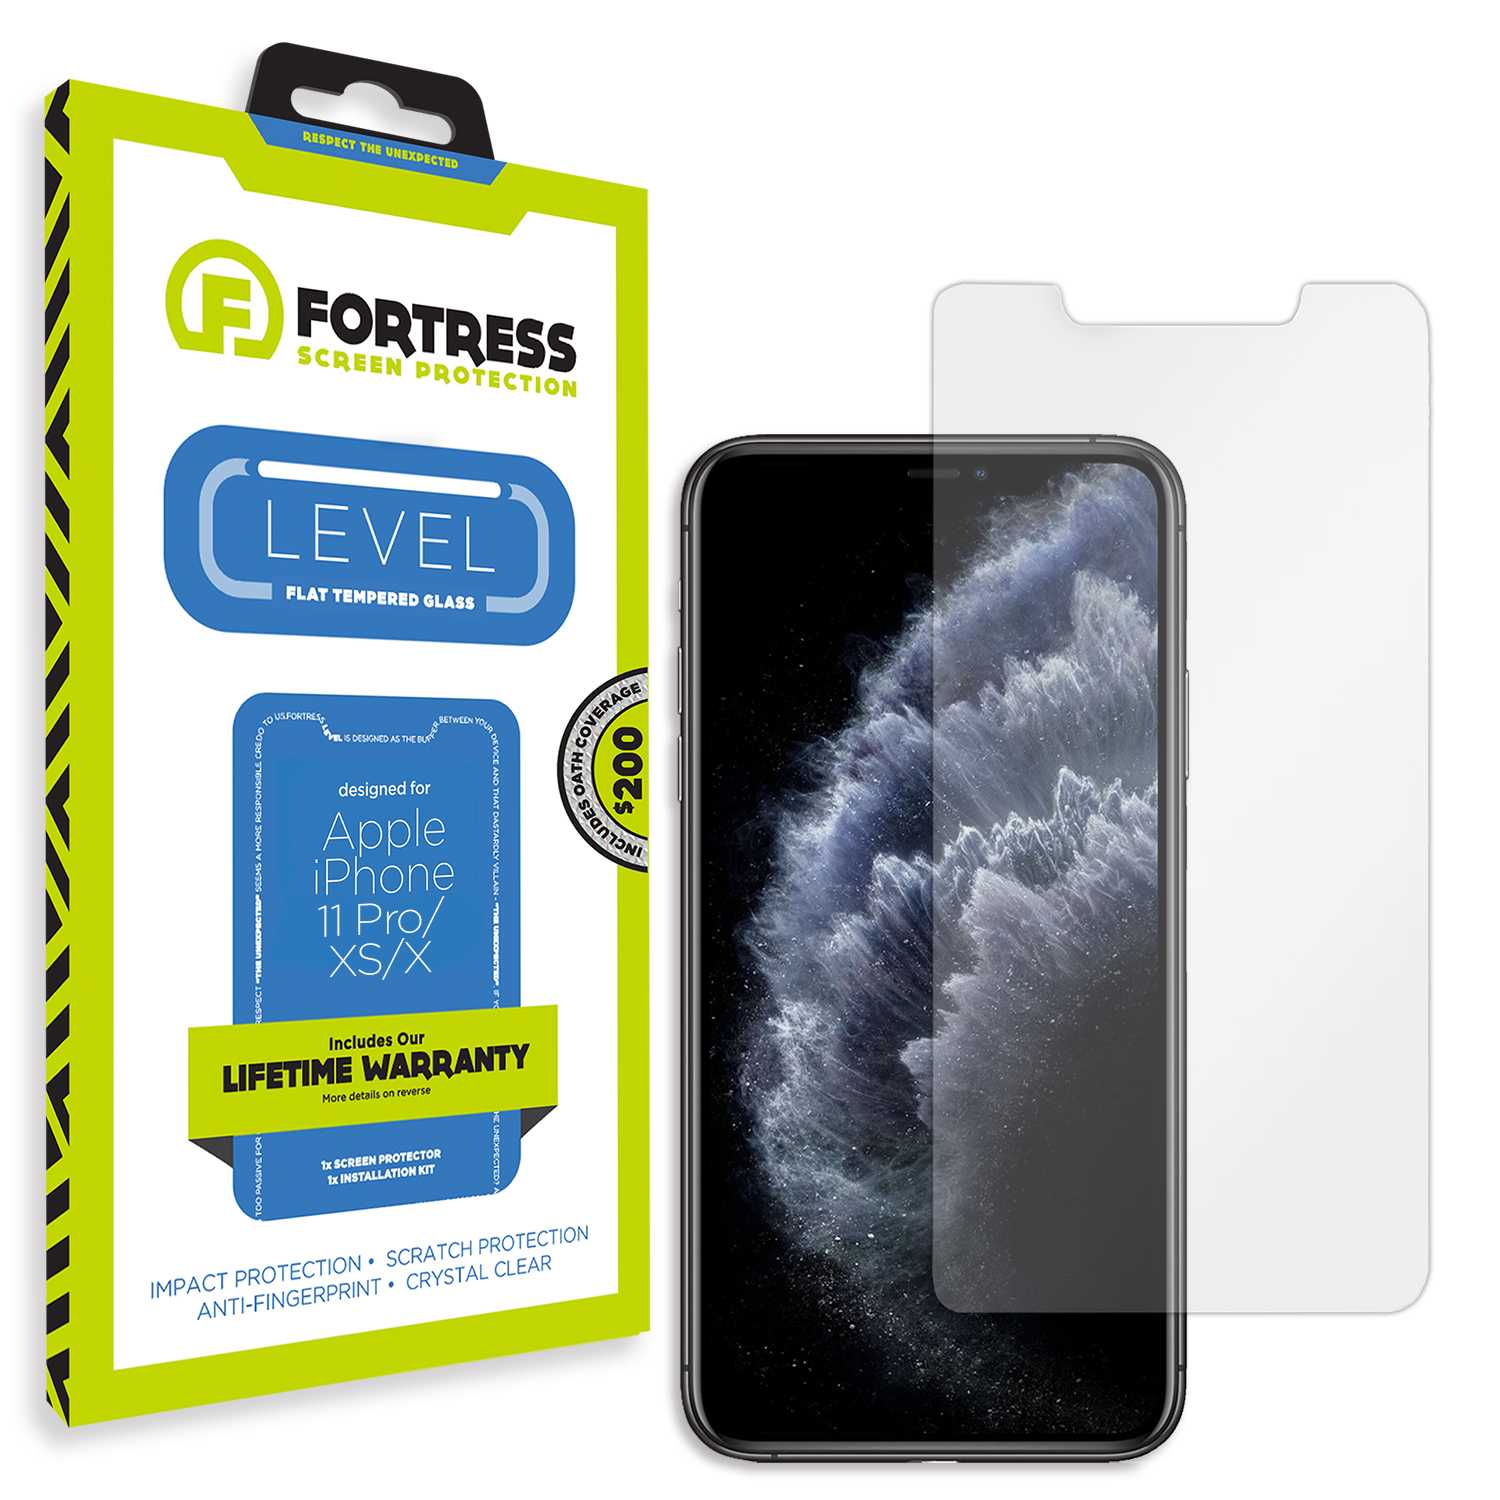 Fortress iPhone X Screen Protector $200Coverage Scooch Screen Protector